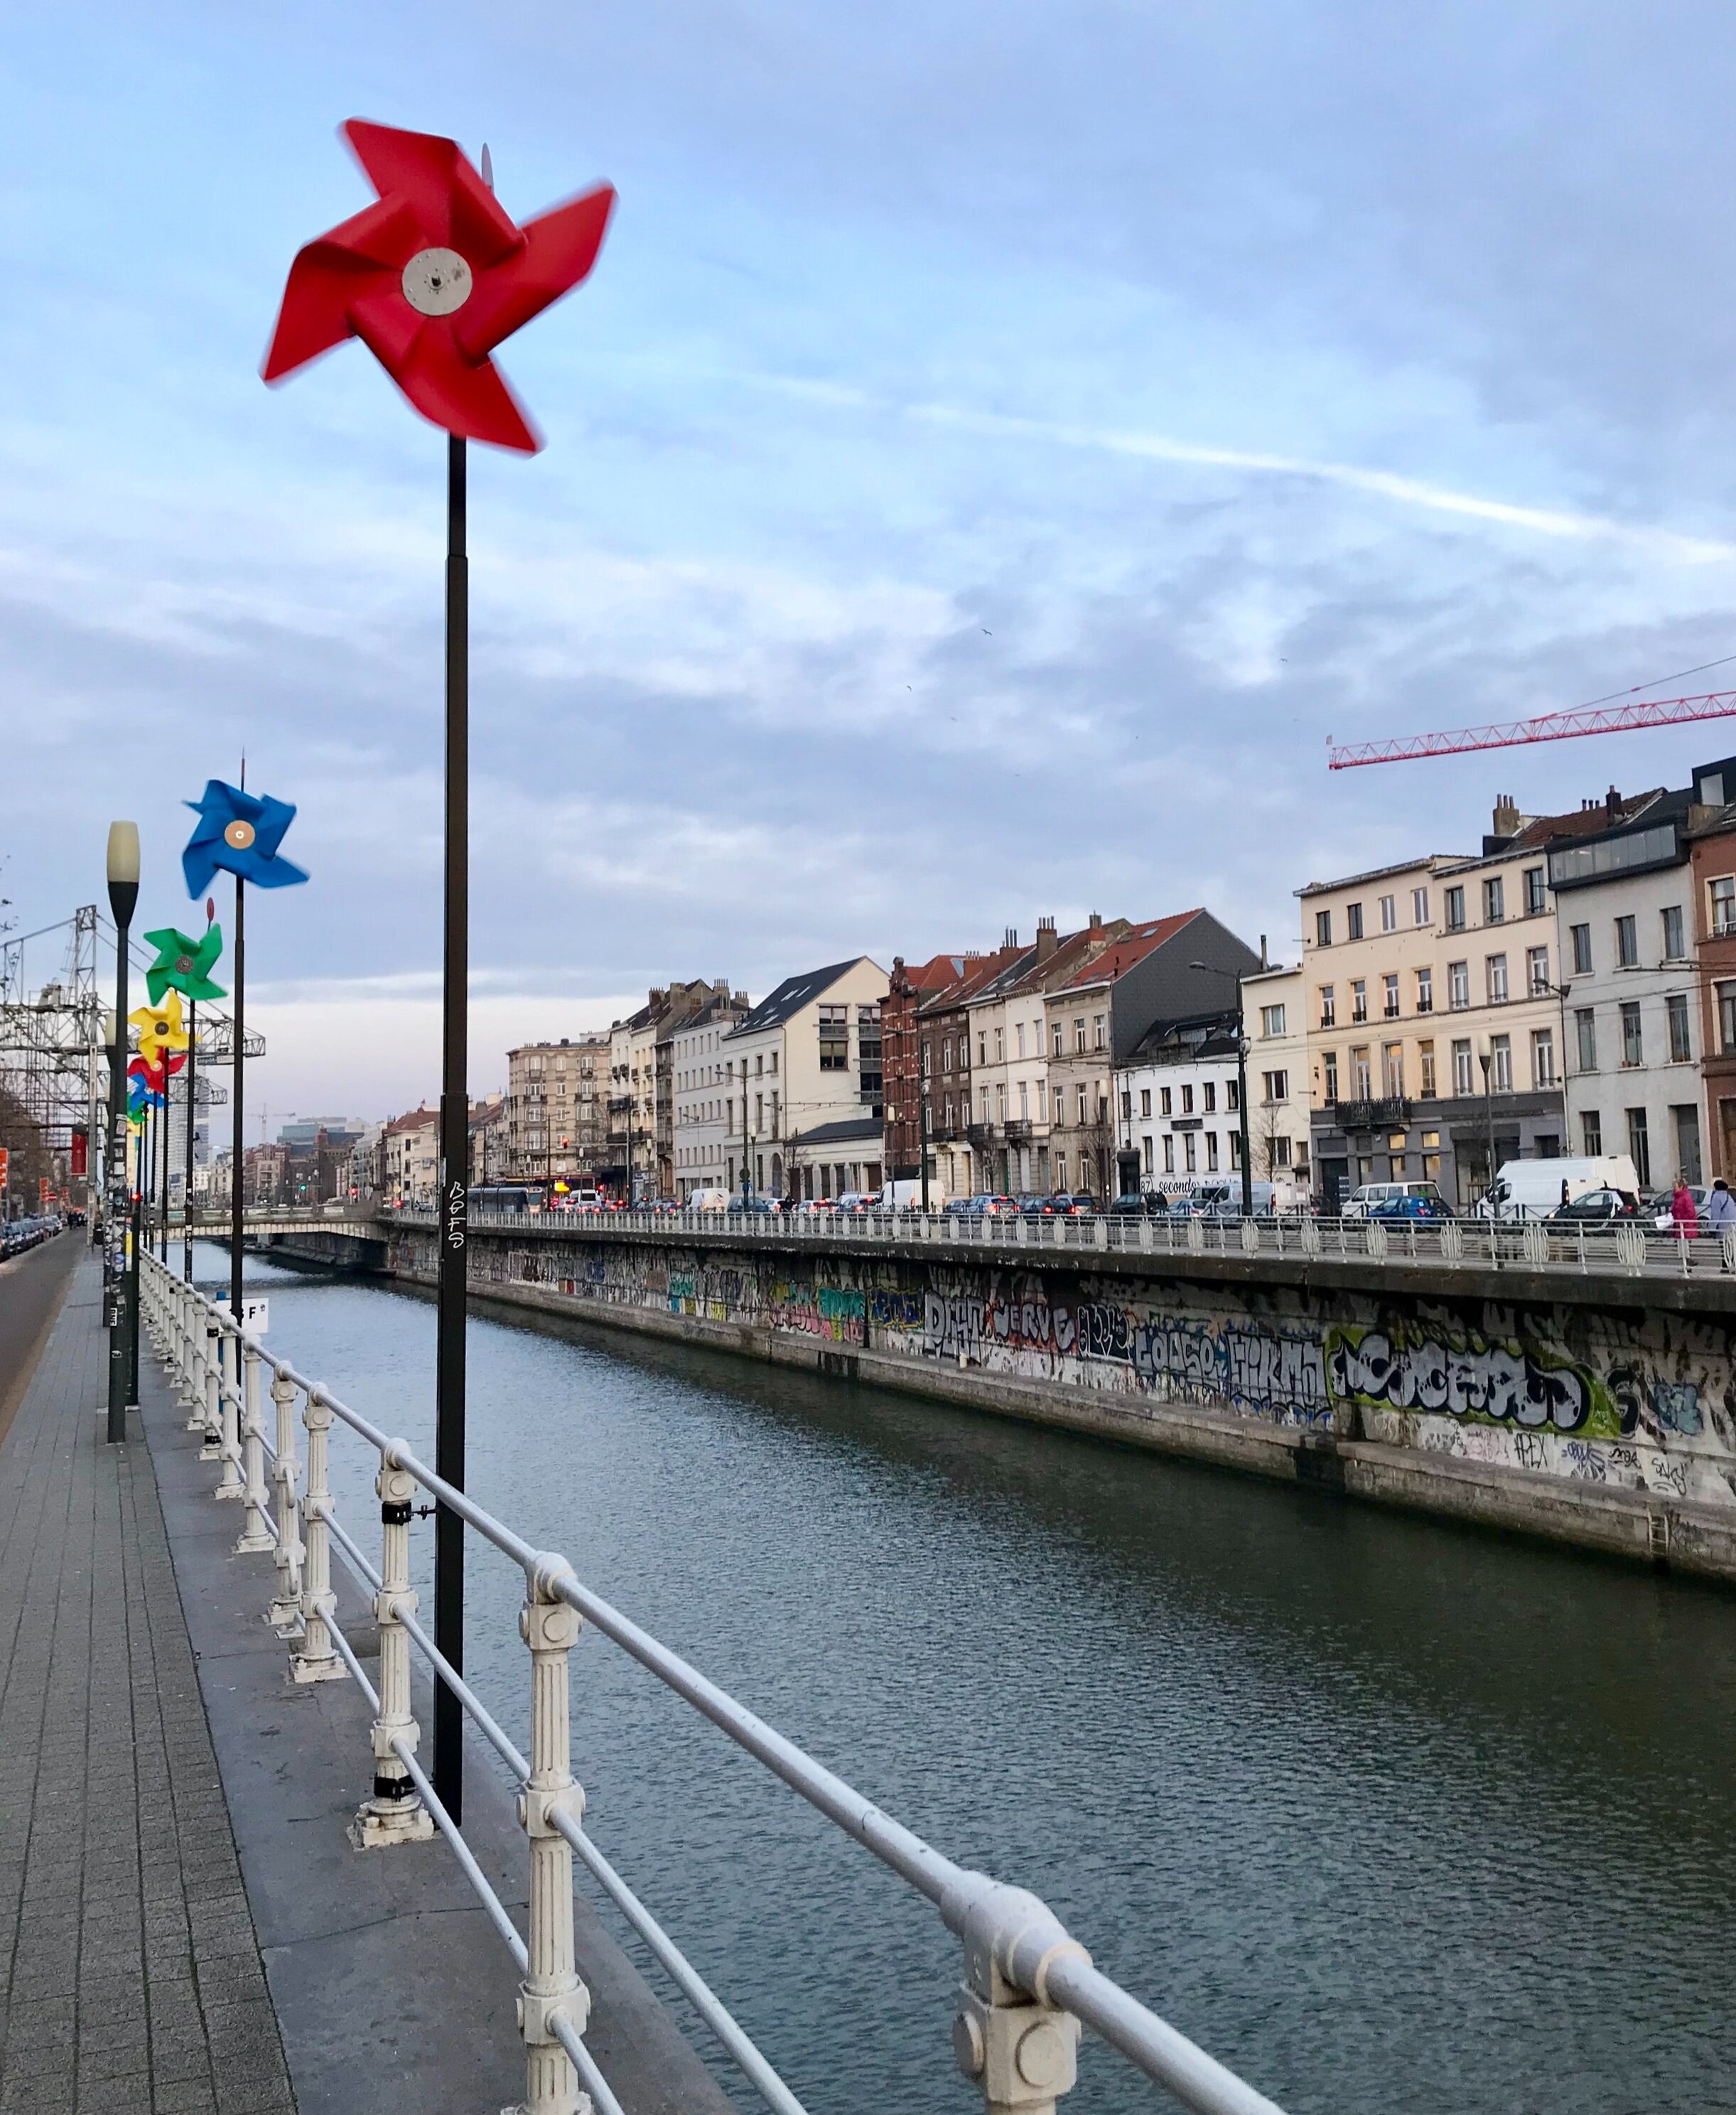 The canal through Brussels is beautiful and I love the pinwheels along the water! 